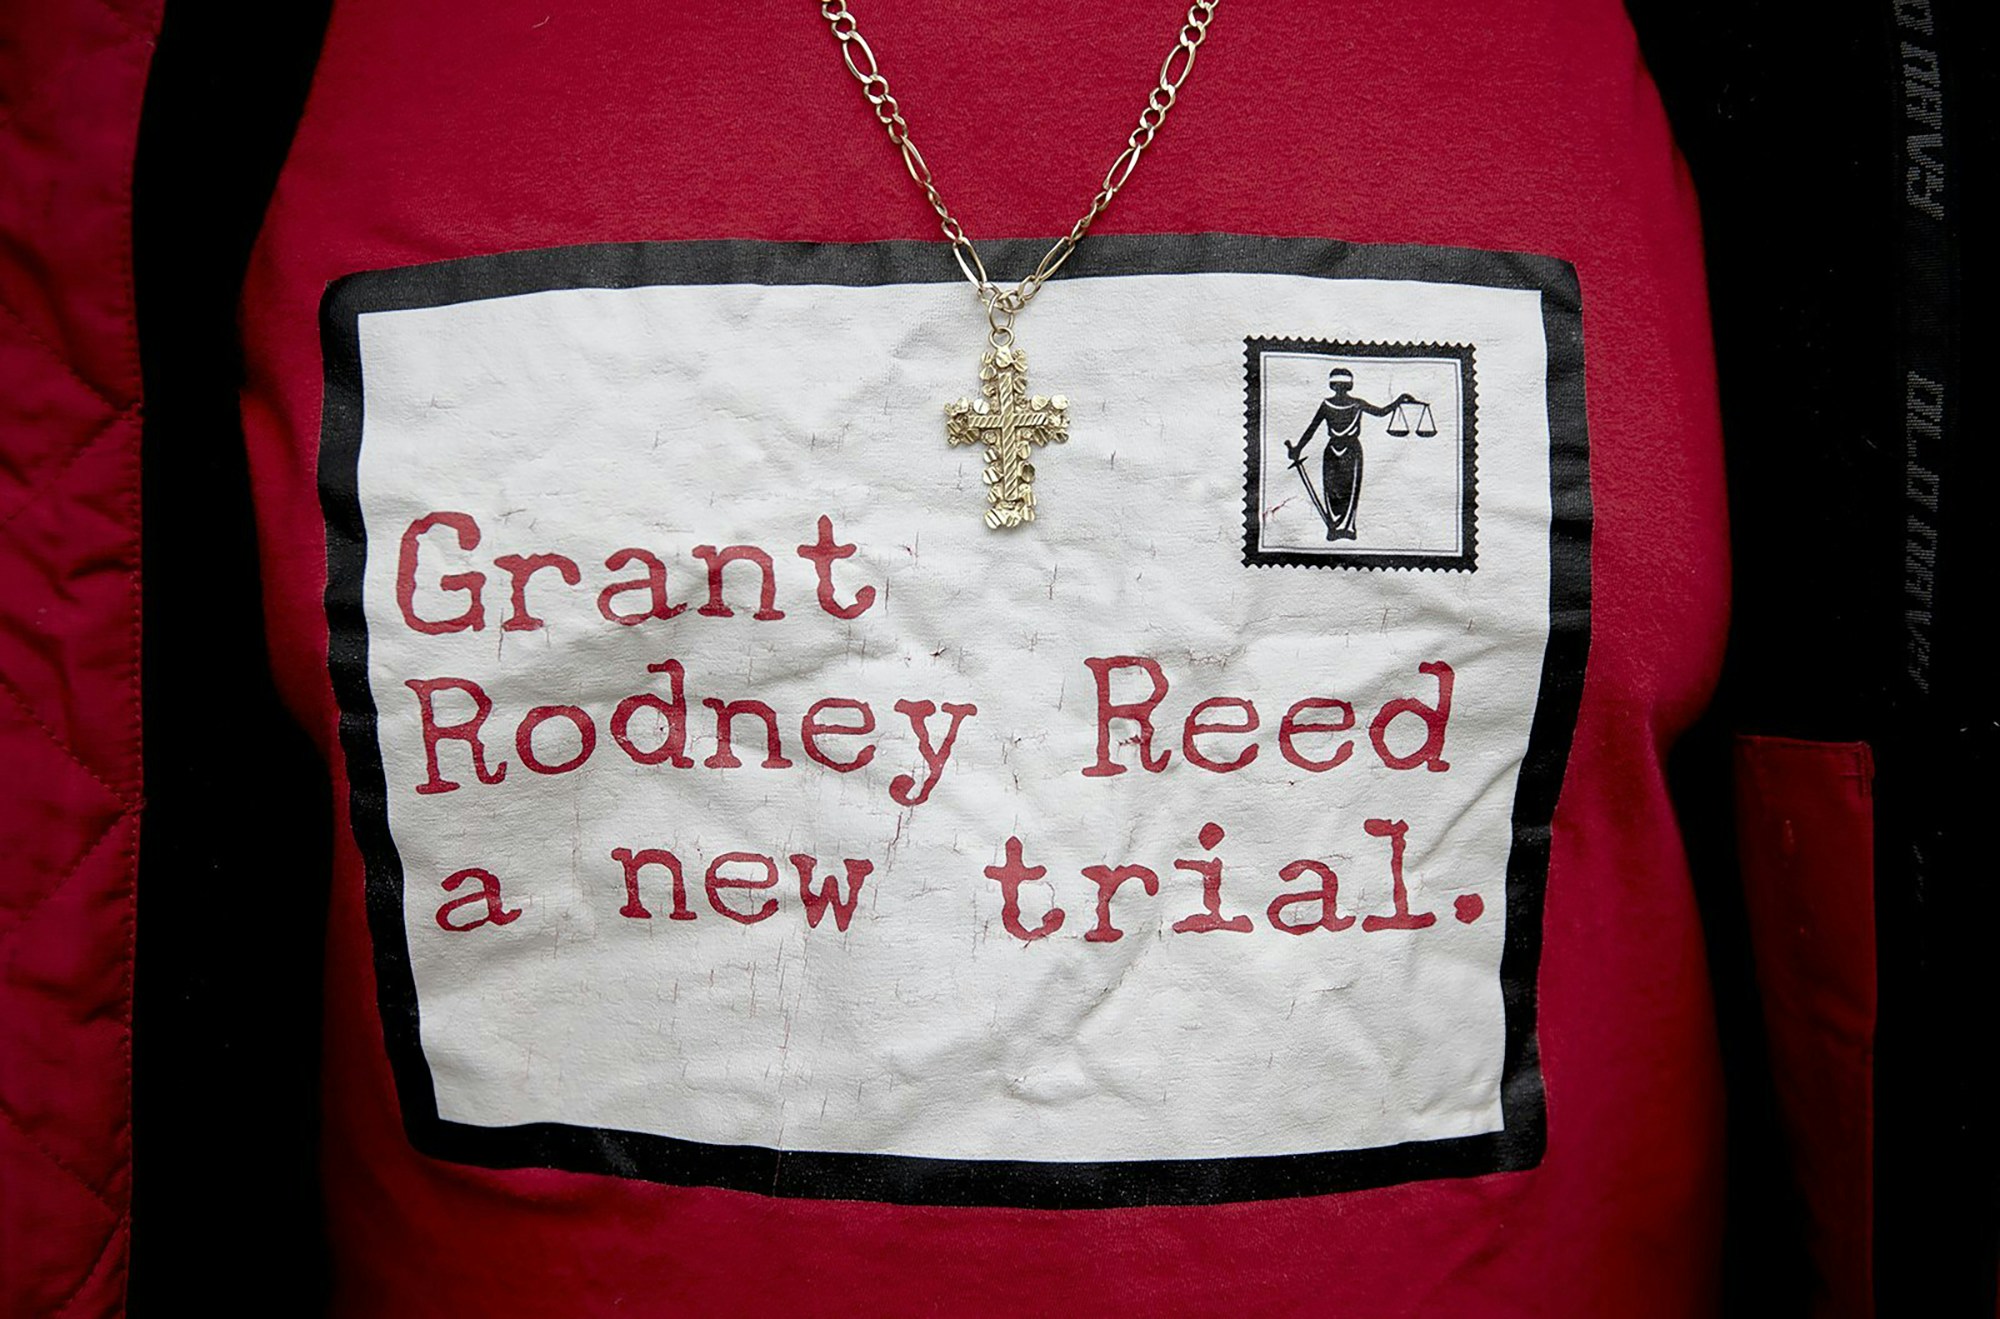 A man wears a shirt in support of Rodney Reed during a protest against Reed's execution on Wednesday, Nov. 13, 2019, in Bastrop, Texas. Protesters rallied in support of Reed’s campaign to stop his scheduled Nov. 20 execution for the 1996 killing of a 19-year-old Stacy Stites. New evidence in the case has led a growing number of Texas legislators, religious leaders and celebrities to press Gov. Greg Abbott to intervene. (Nick Wagner/Austin American-Statesman via AP)